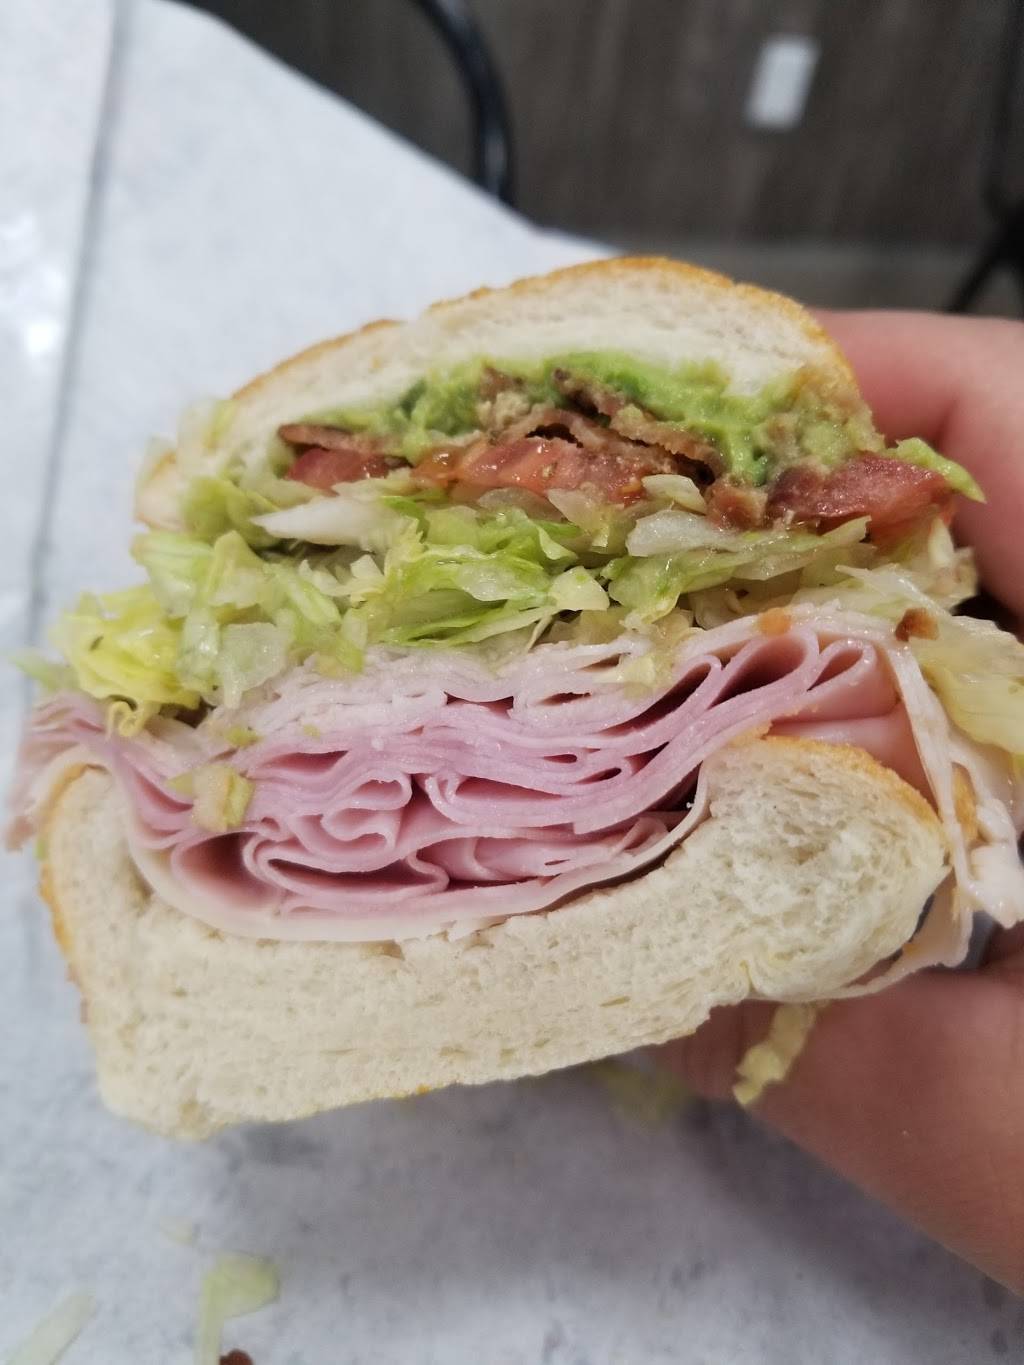 jersey mike's telegraph